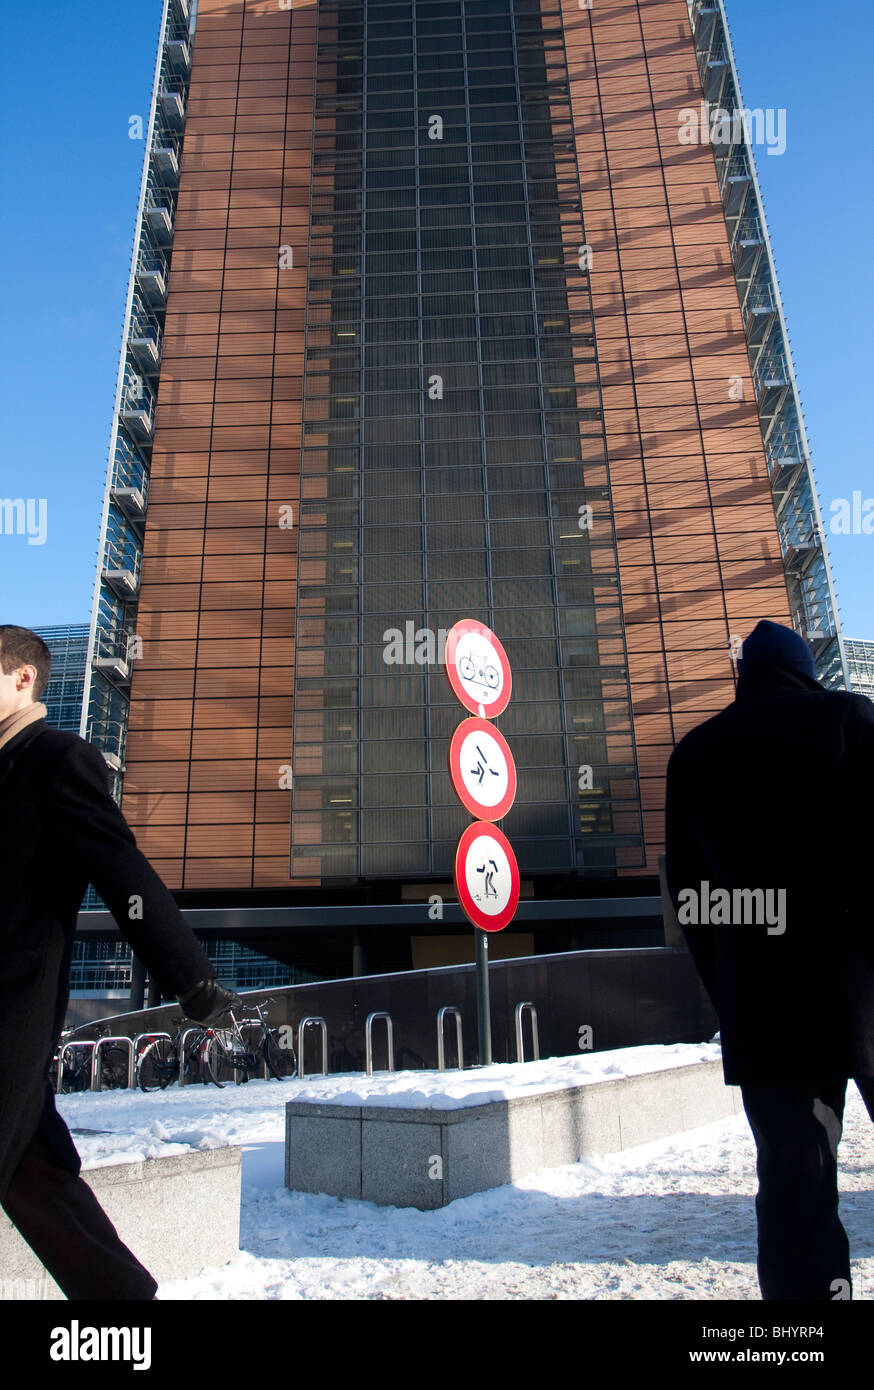 Two men walk next to the Berlaymont building, the European Commission headquarters in Brussels, Belgium. Stock Photo